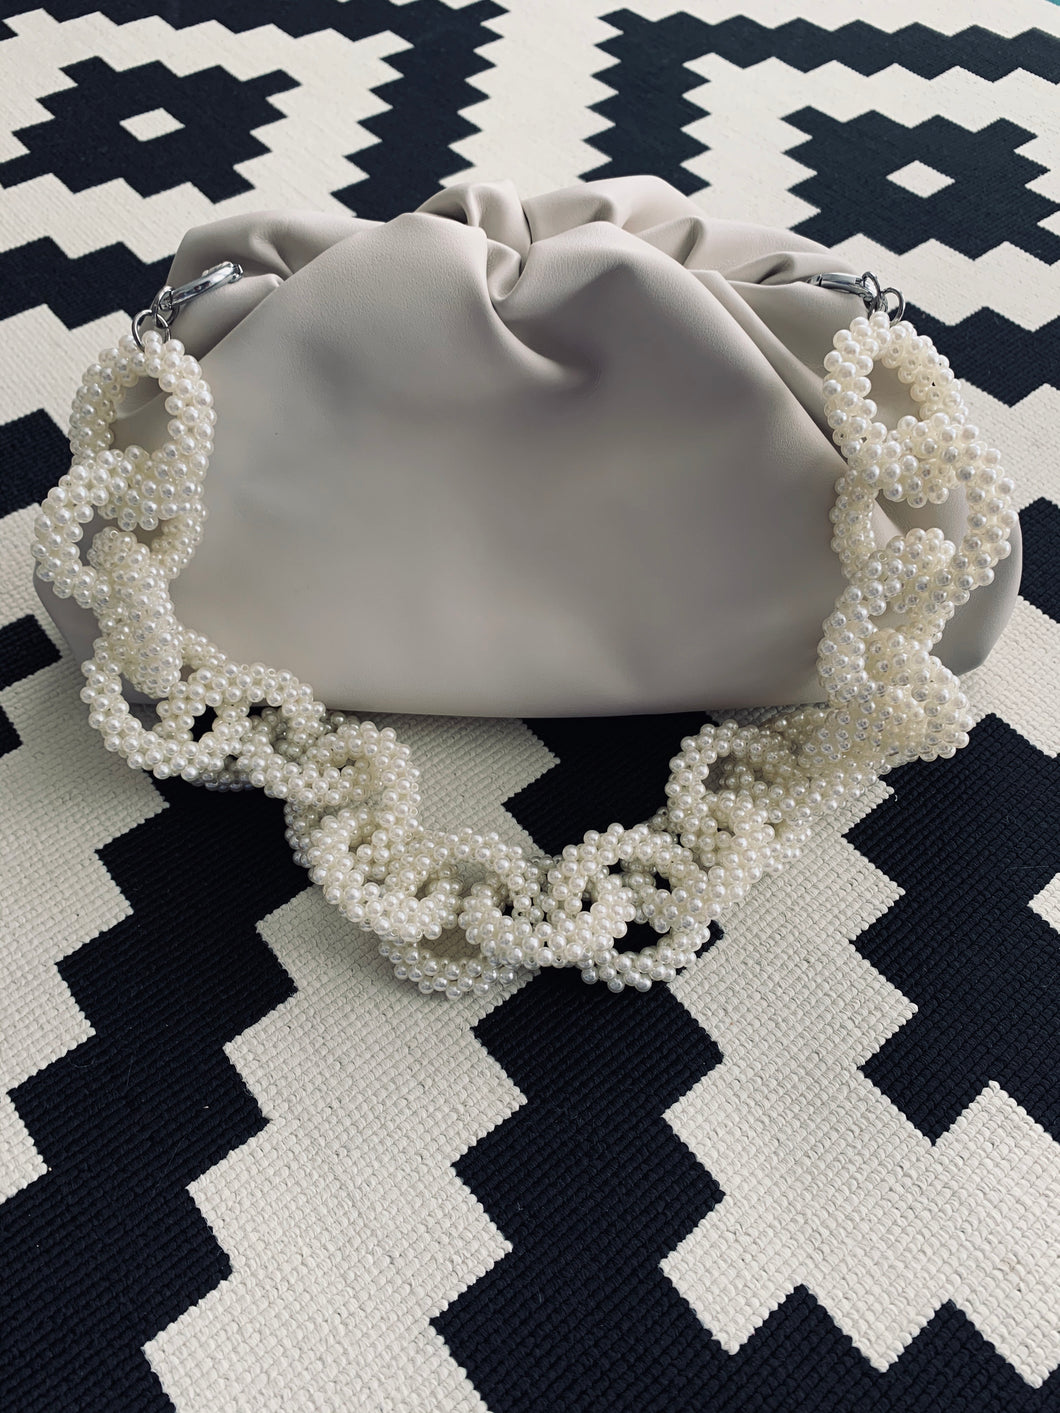 Handmade pearl link bag strap 4-5 days delivery